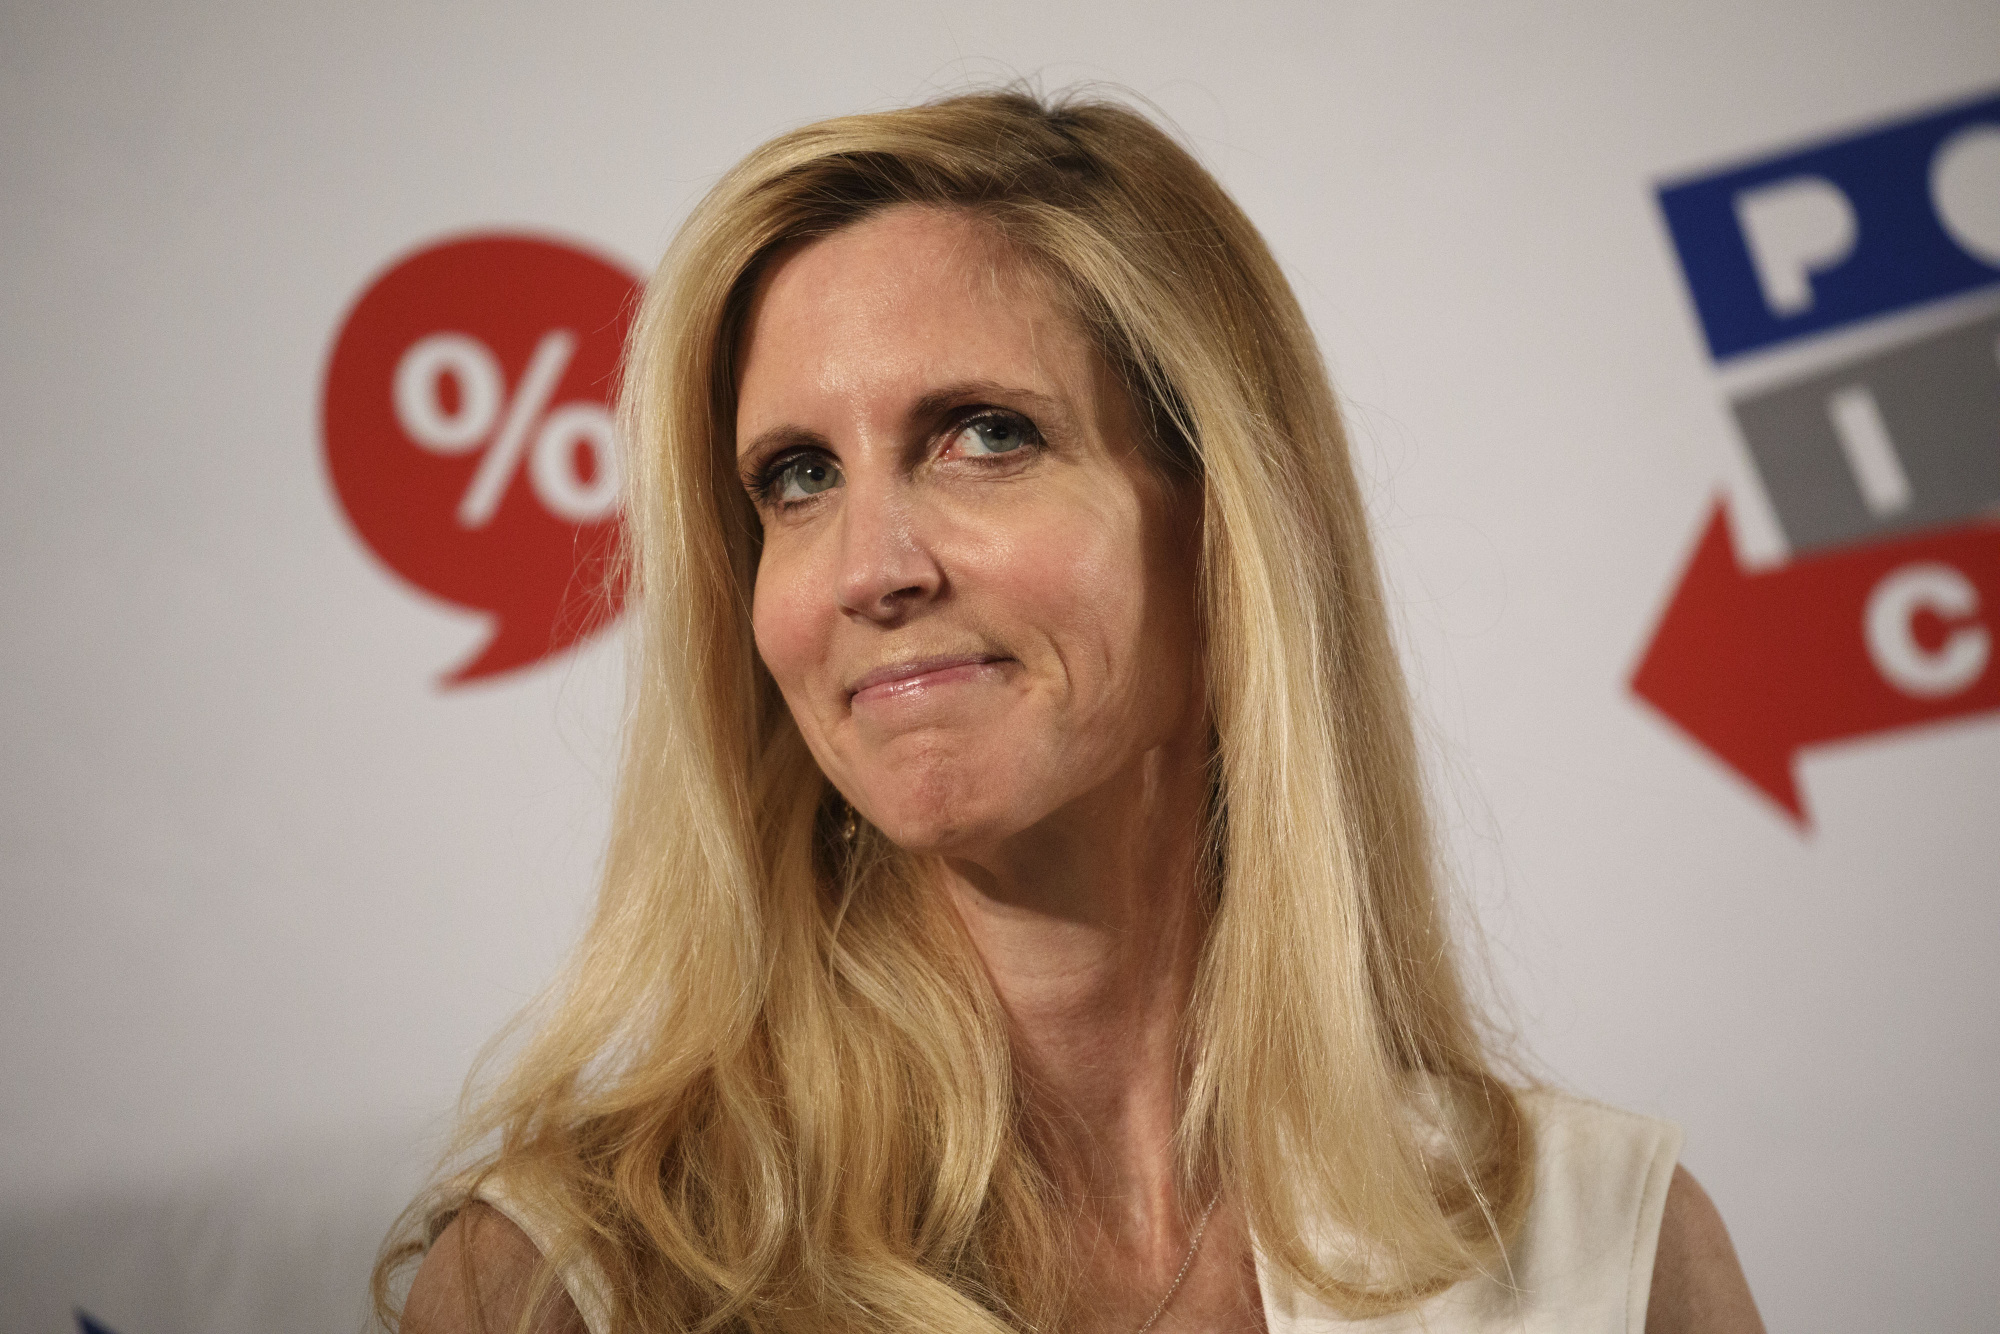 Ally Ann S - Ann Coulter Latest: Donald Trump Calls Her 'Nut Job' - Bloomberg